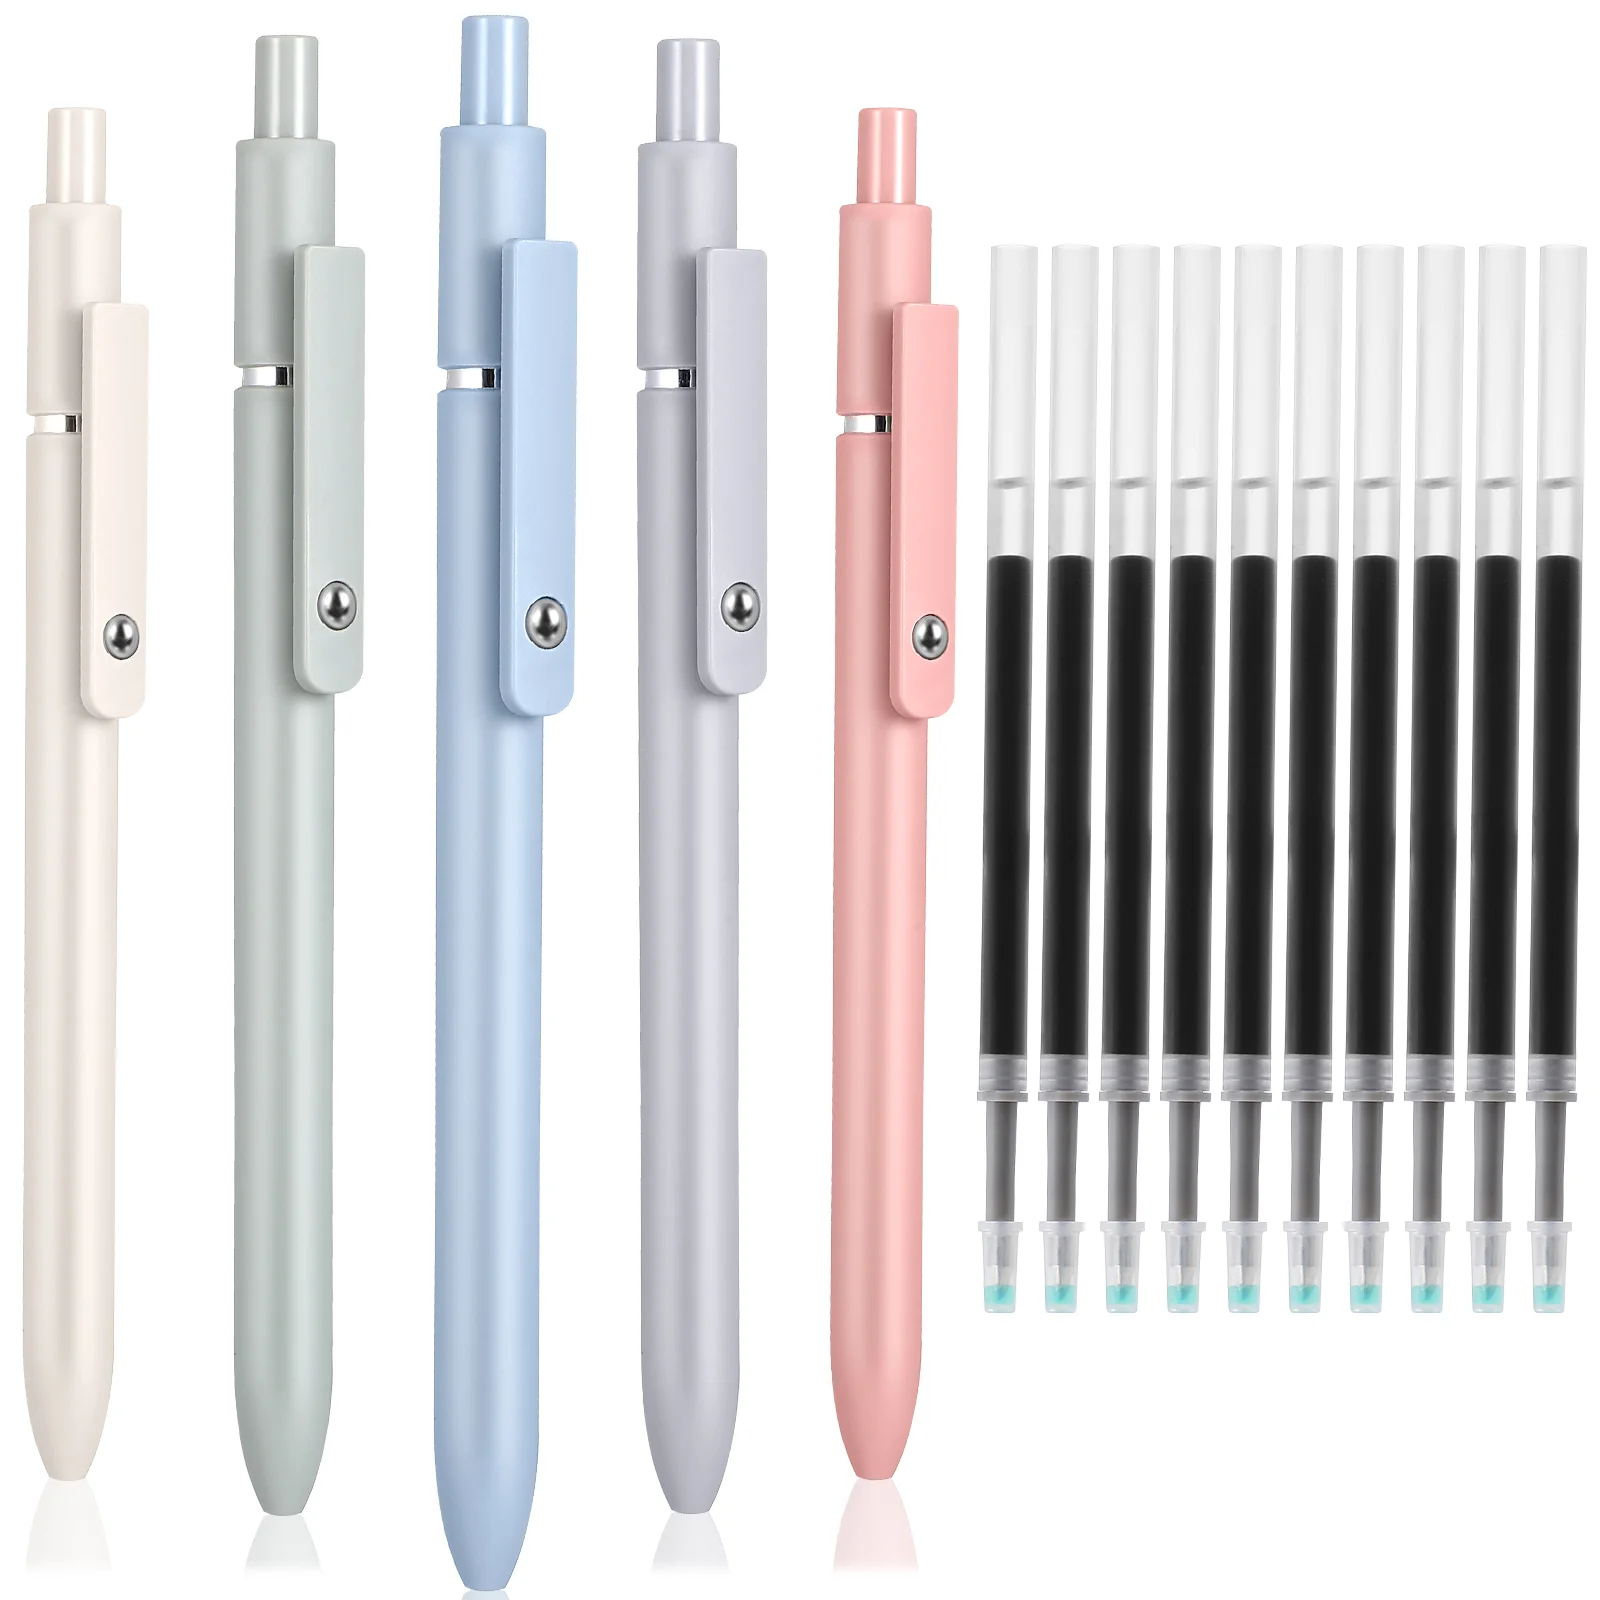 

Pens Pen Ink Ballpoint Point Fine Writing Black Retractable Student School Rolling Quick Gift Dry Exam Pastel Cute Graduation